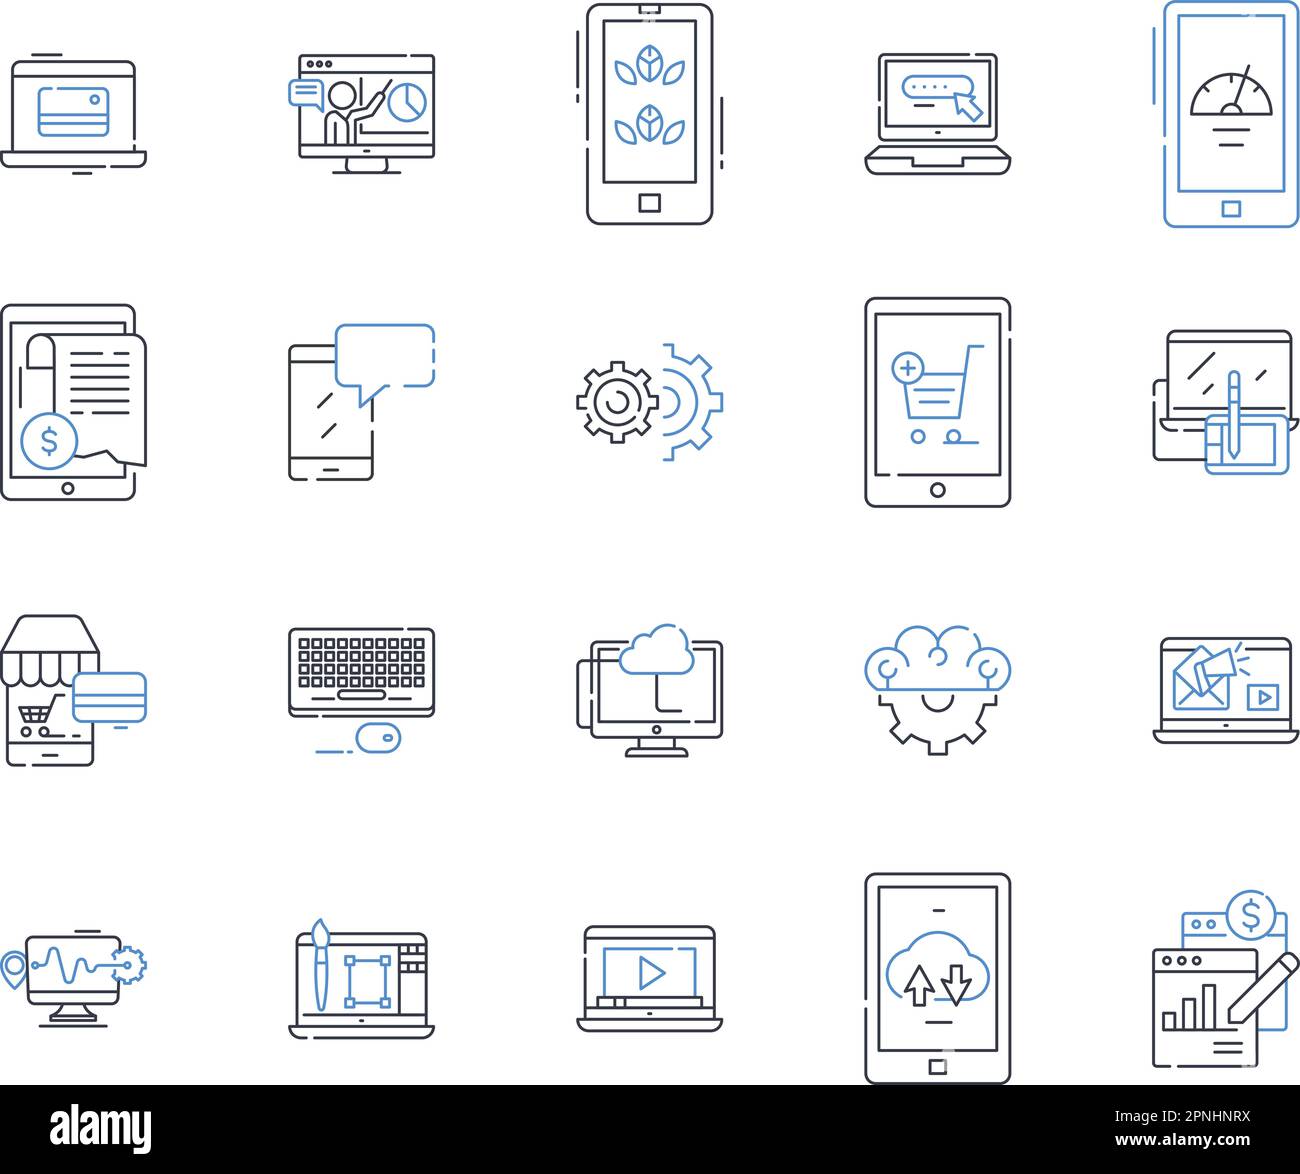 Appliances line icons collection. Refrigerator, Oven, Dishwasher, Blender, Microwave, Washing machine, Dryer vector and linear illustration. Cooktop Stock Vector